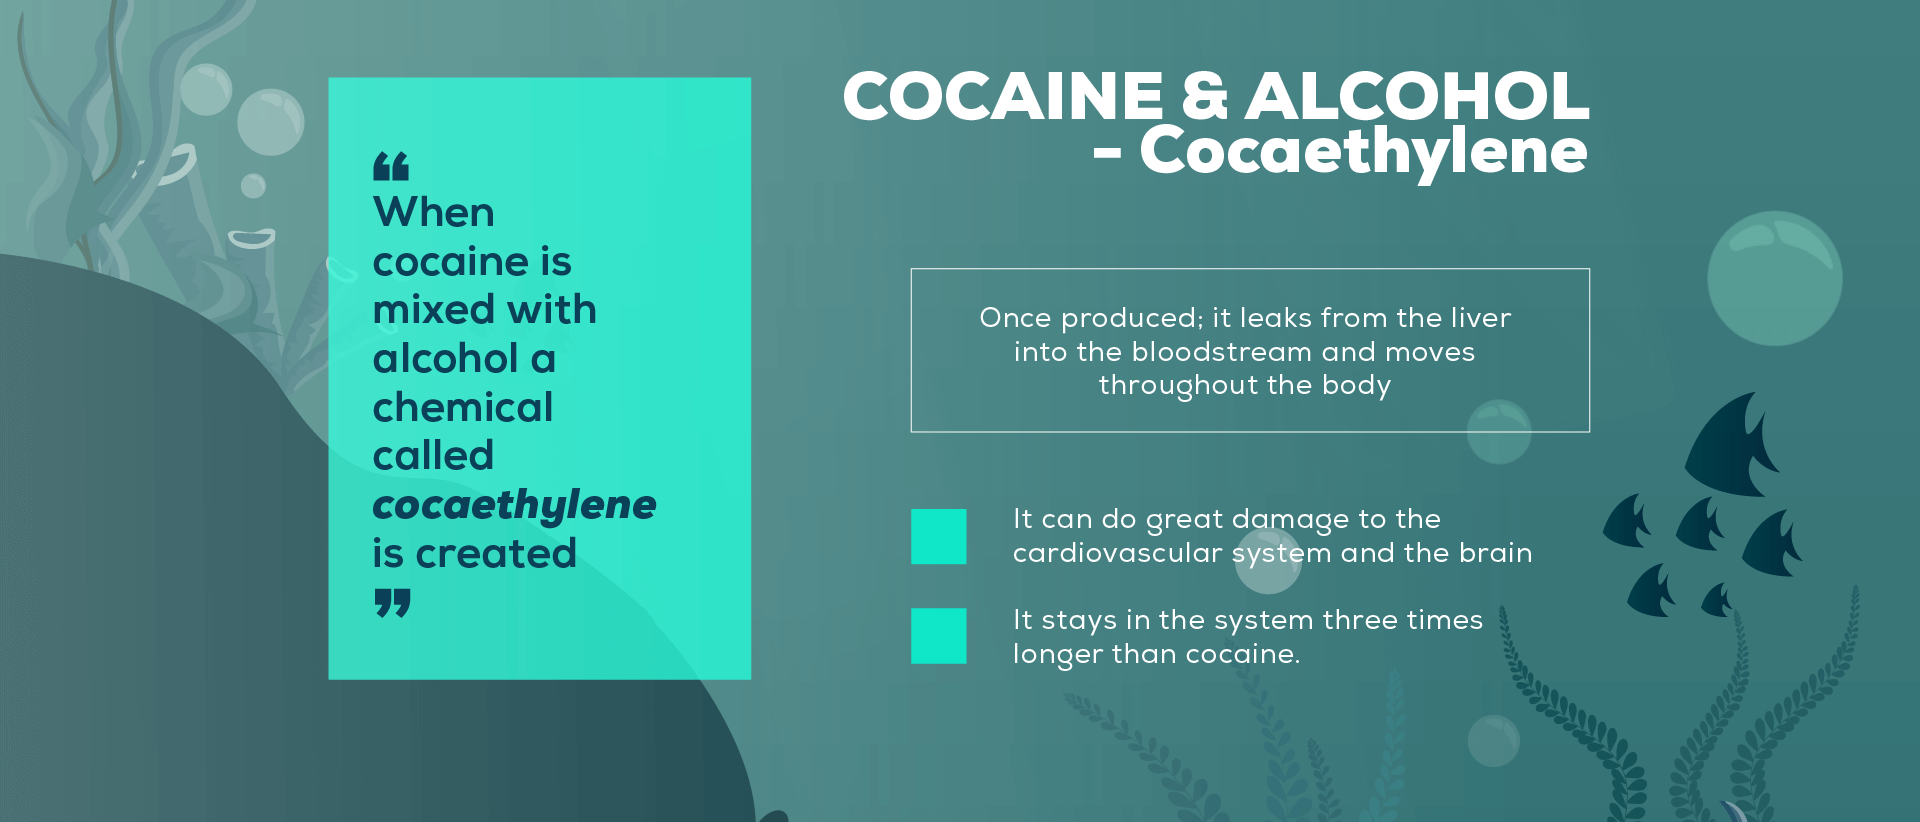 Mixing Cocaine and Alcohol